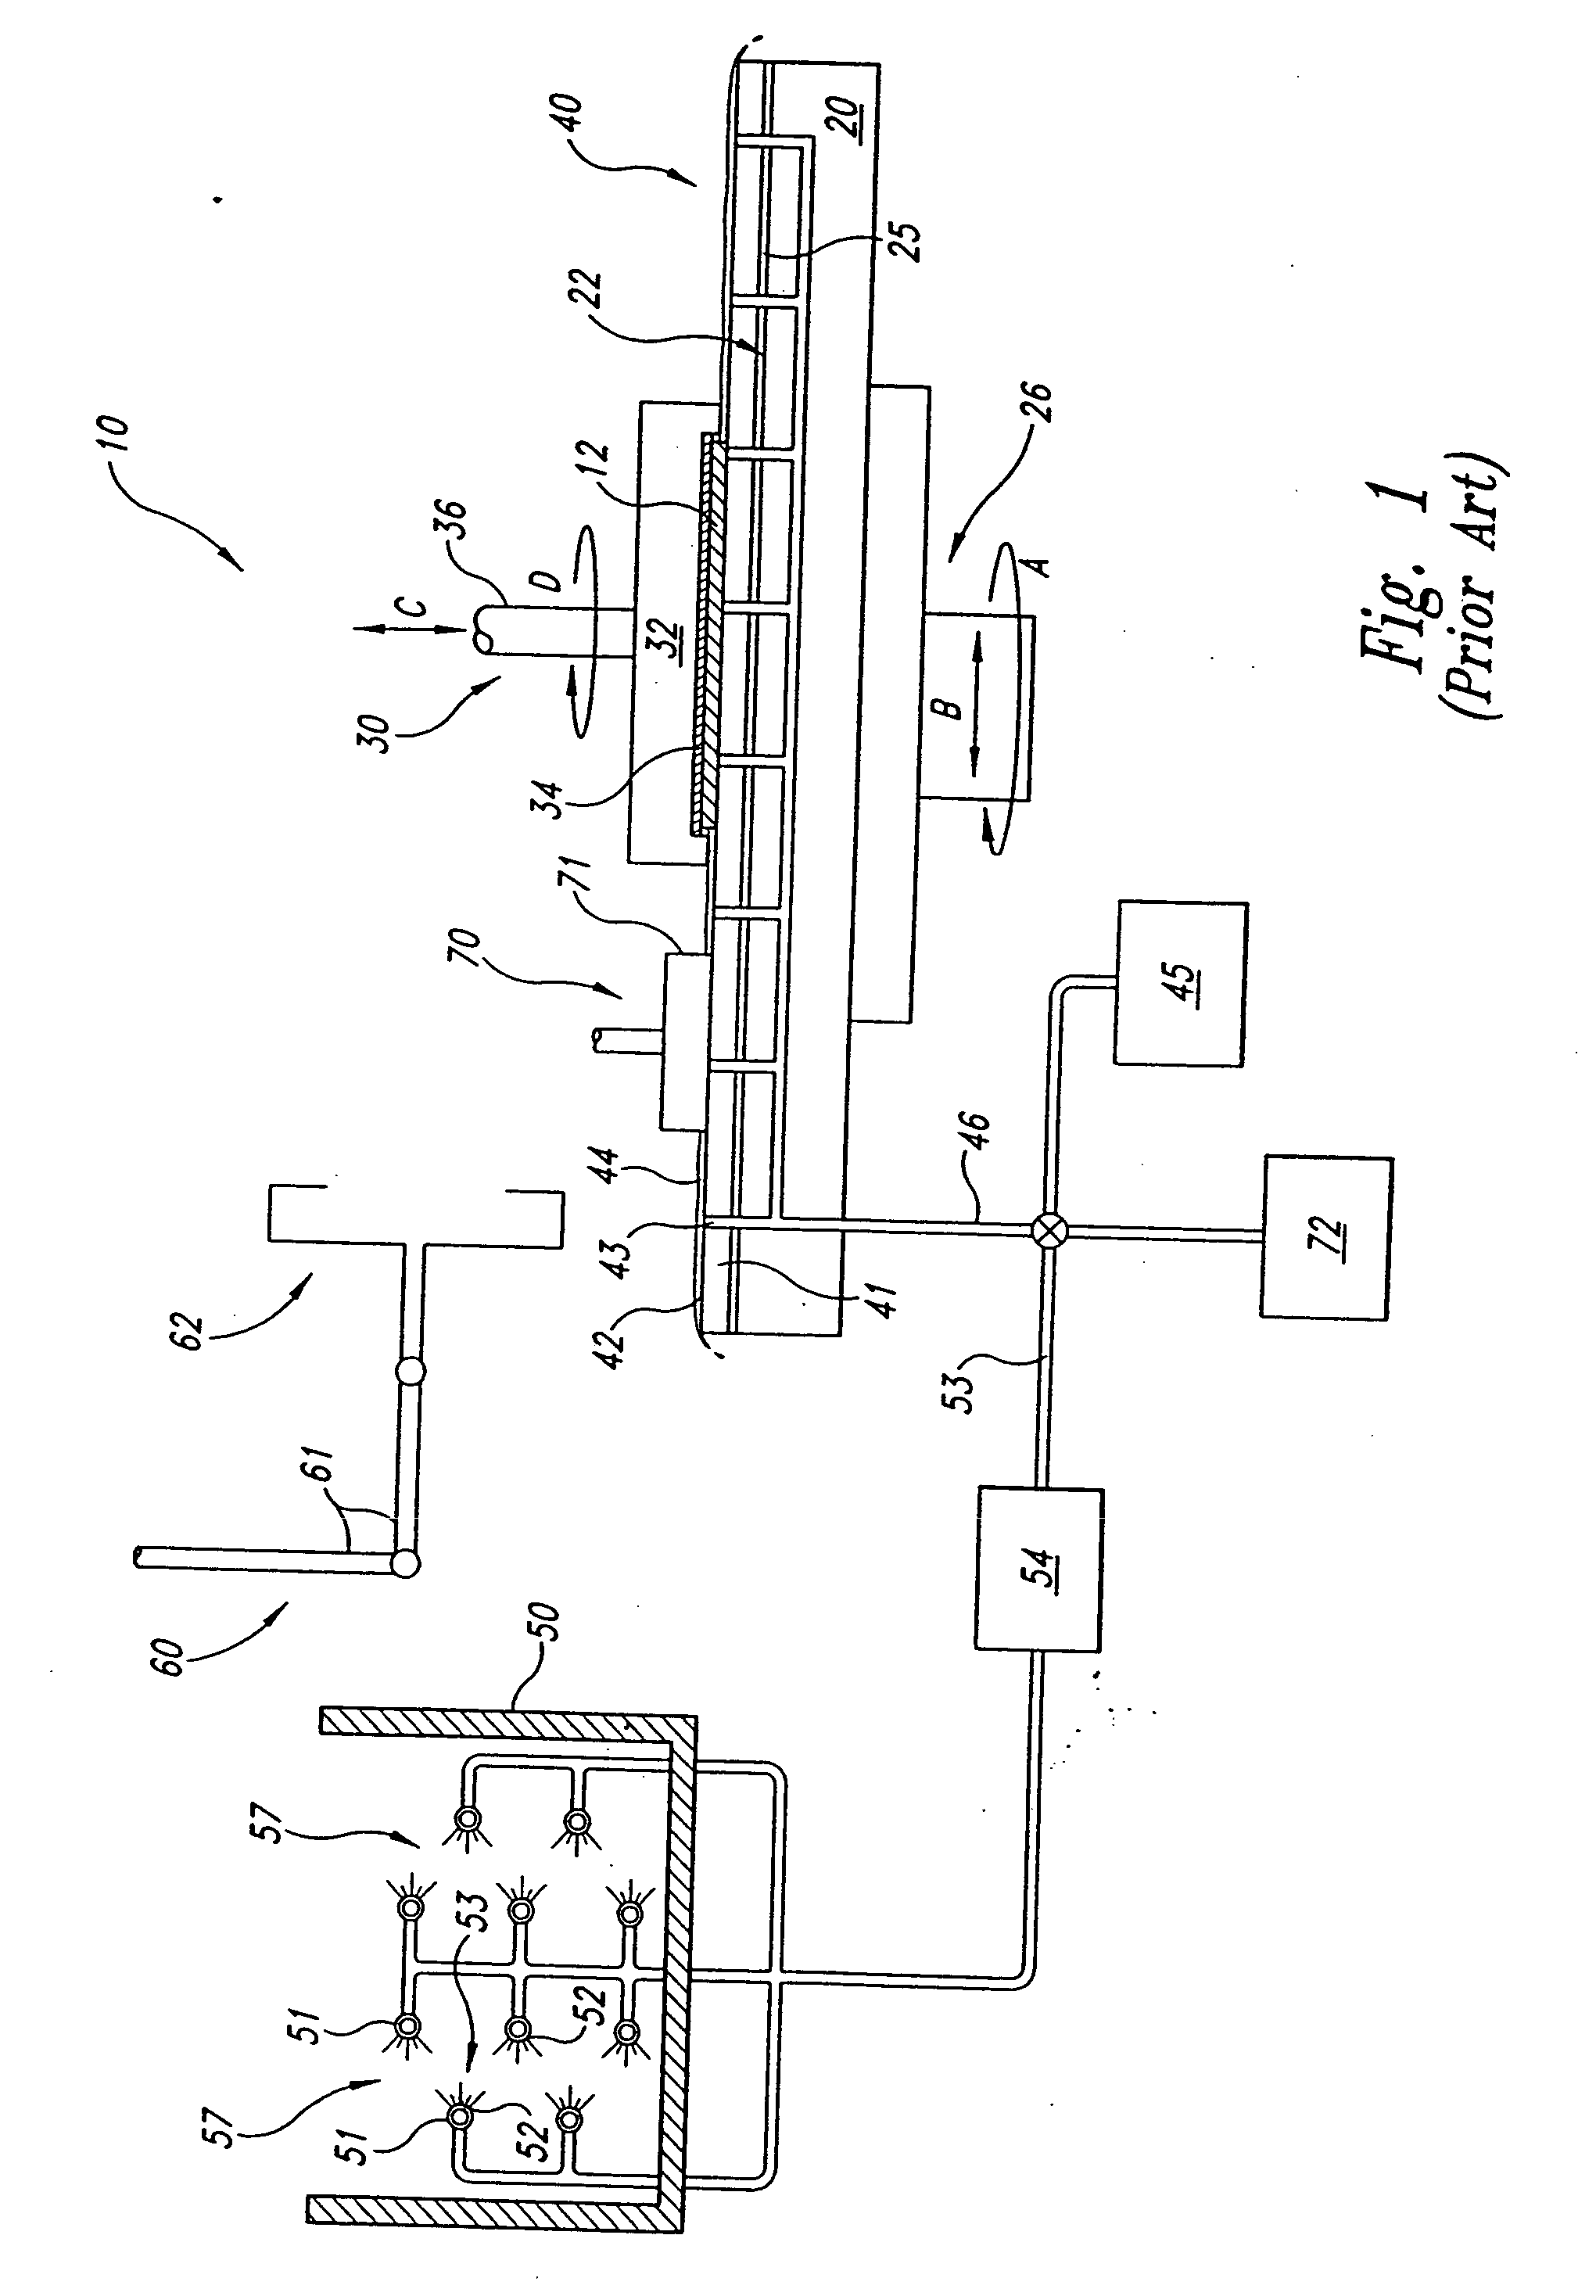 Method for controlling ph during planarization and cleaning of microelectronic substrates